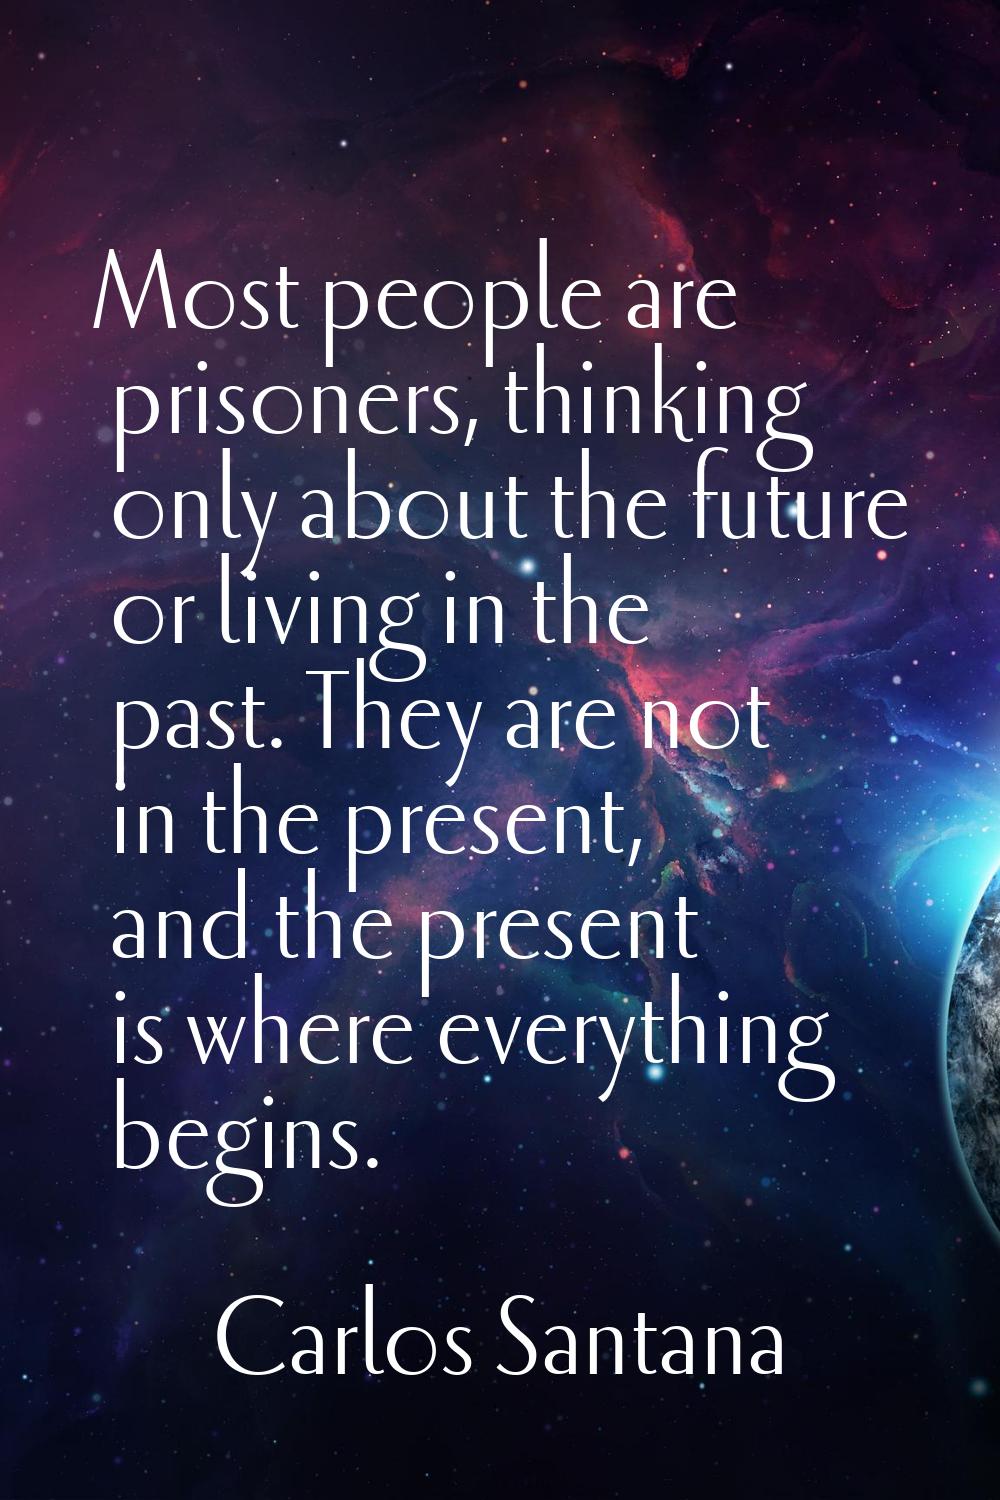 Most people are prisoners, thinking only about the future or living in the past. They are not in th